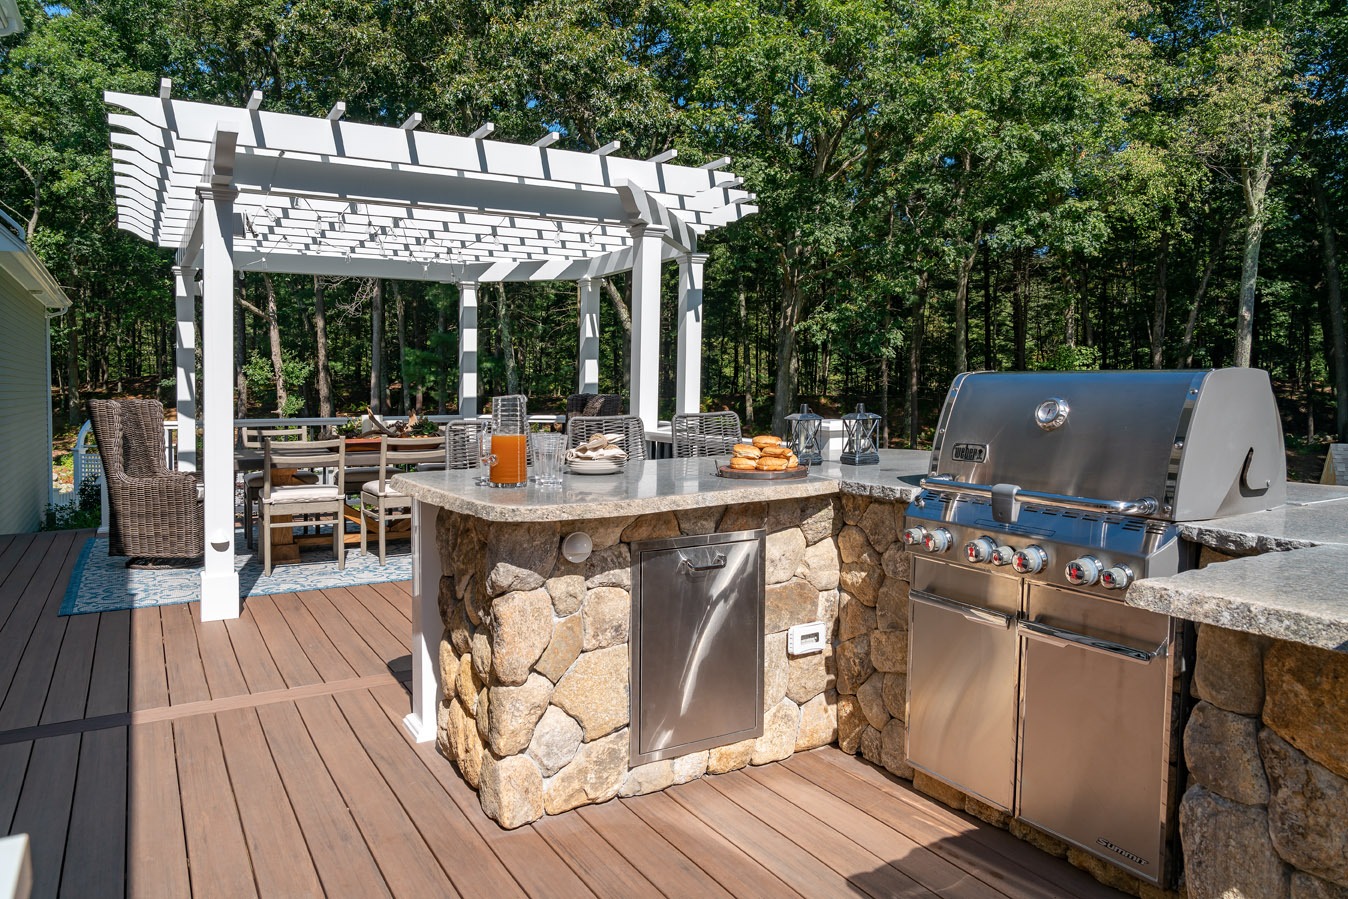 An outdoor kitchen with a stone counter, pergola, dining area, and grill on a wooden deck surrounded by trees on a sunny day.